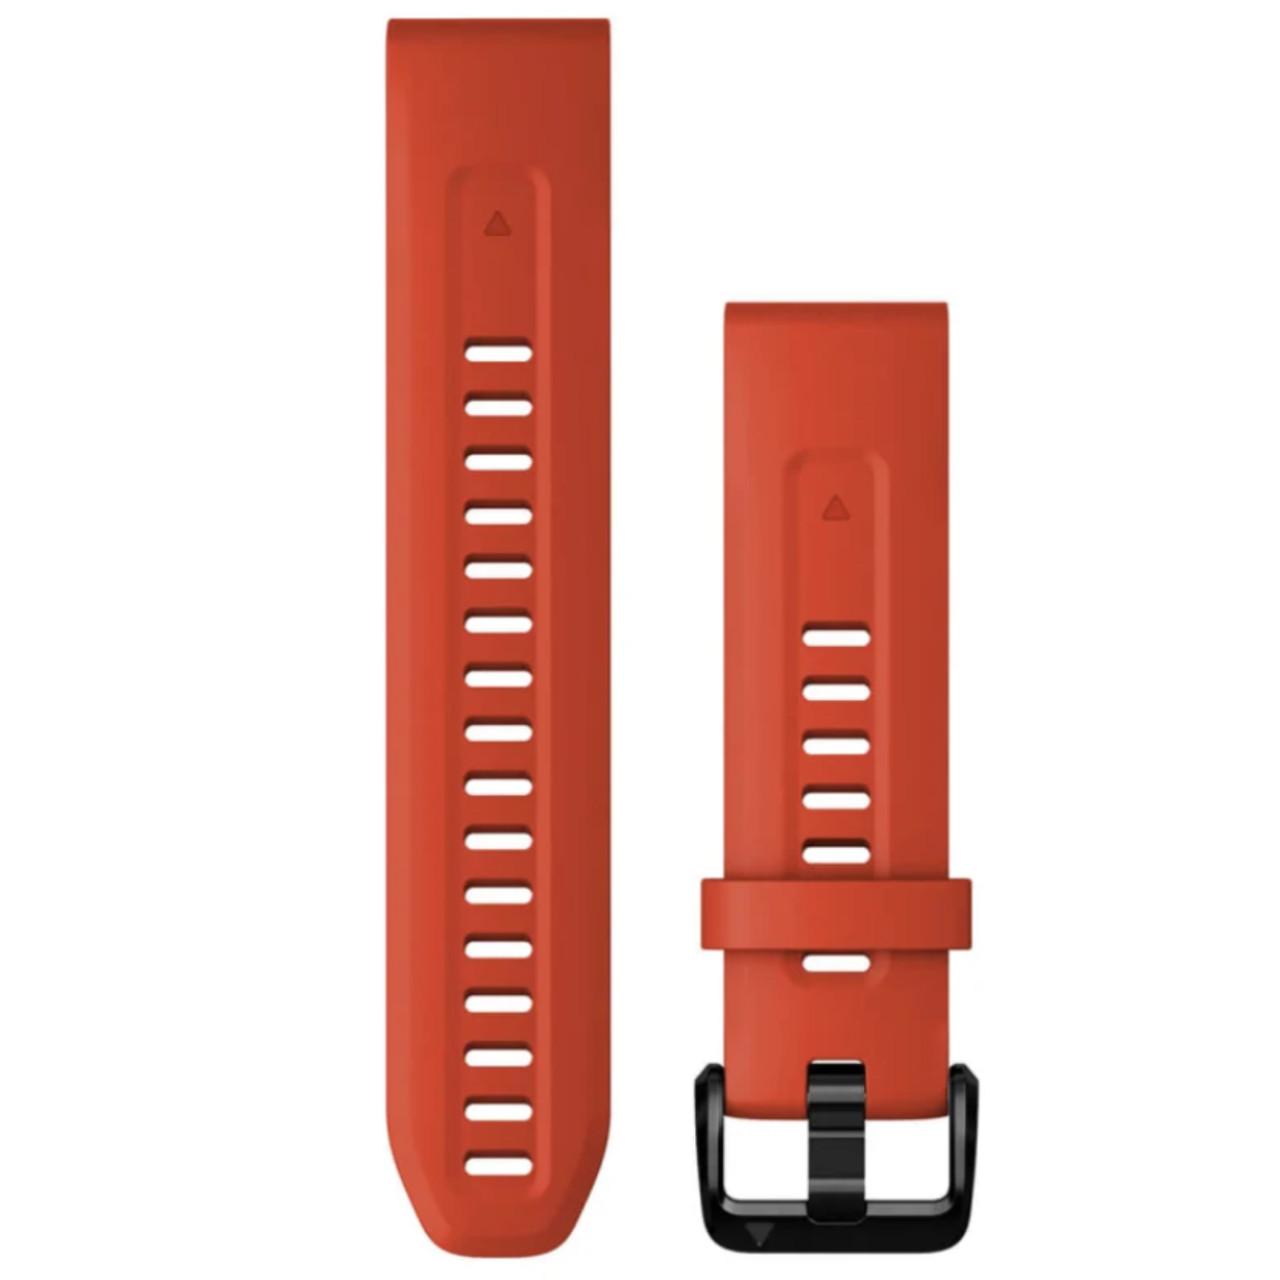 Garmin New OEM QuickFit® 20 Watch Bands Flame Red Silicone, 010-13102-02